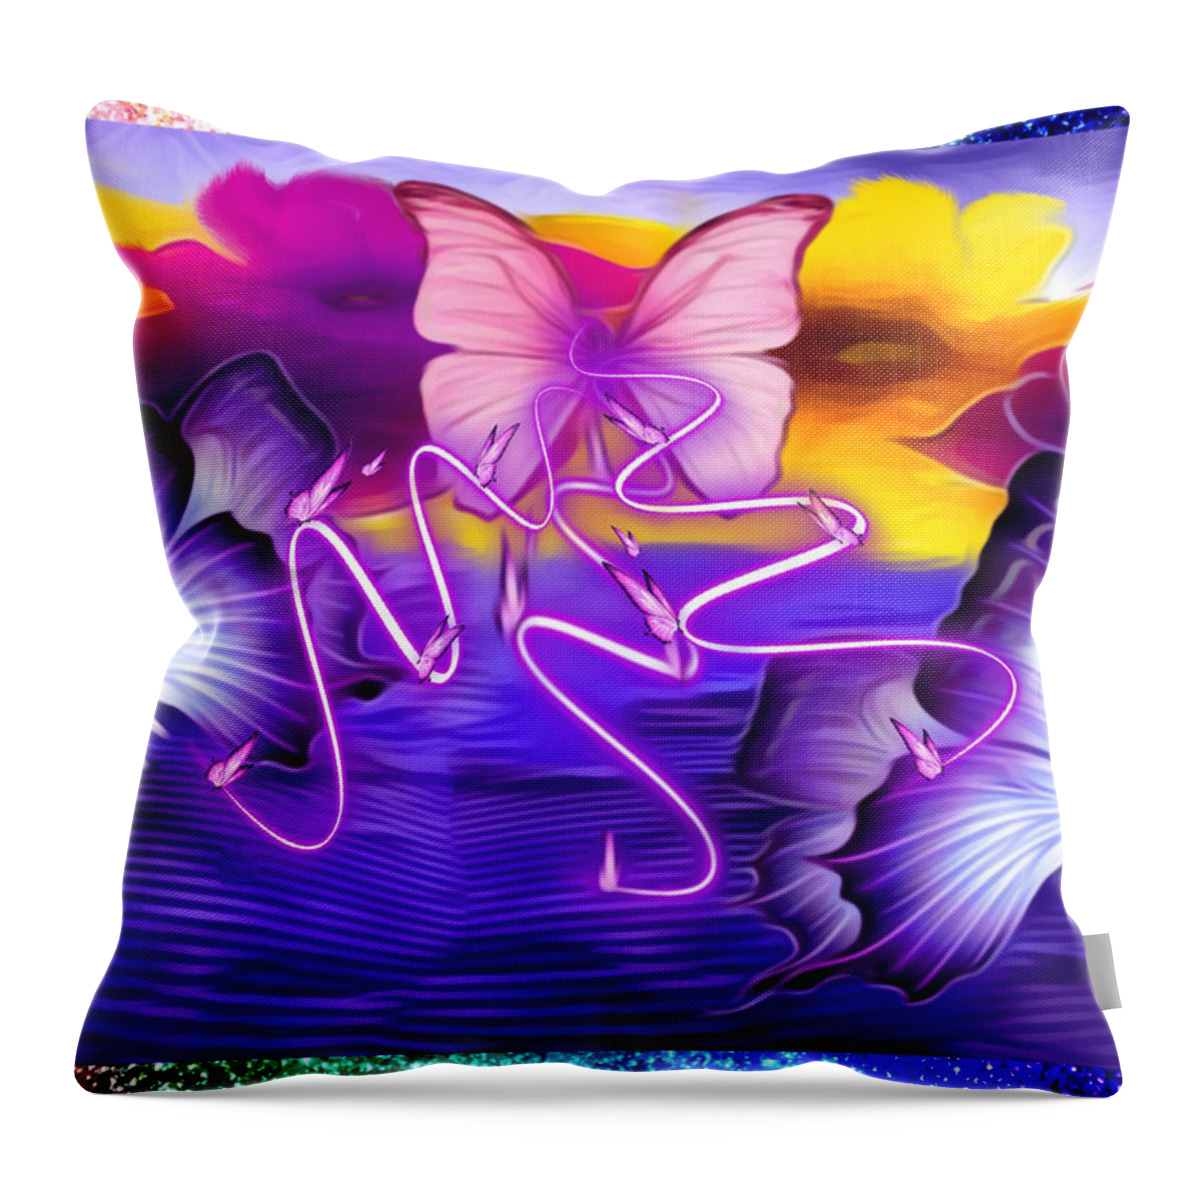 Digital Art Graphic Drawing Throw Pillow featuring the digital art Fantasy Butterflies by Gayle Price Thomas